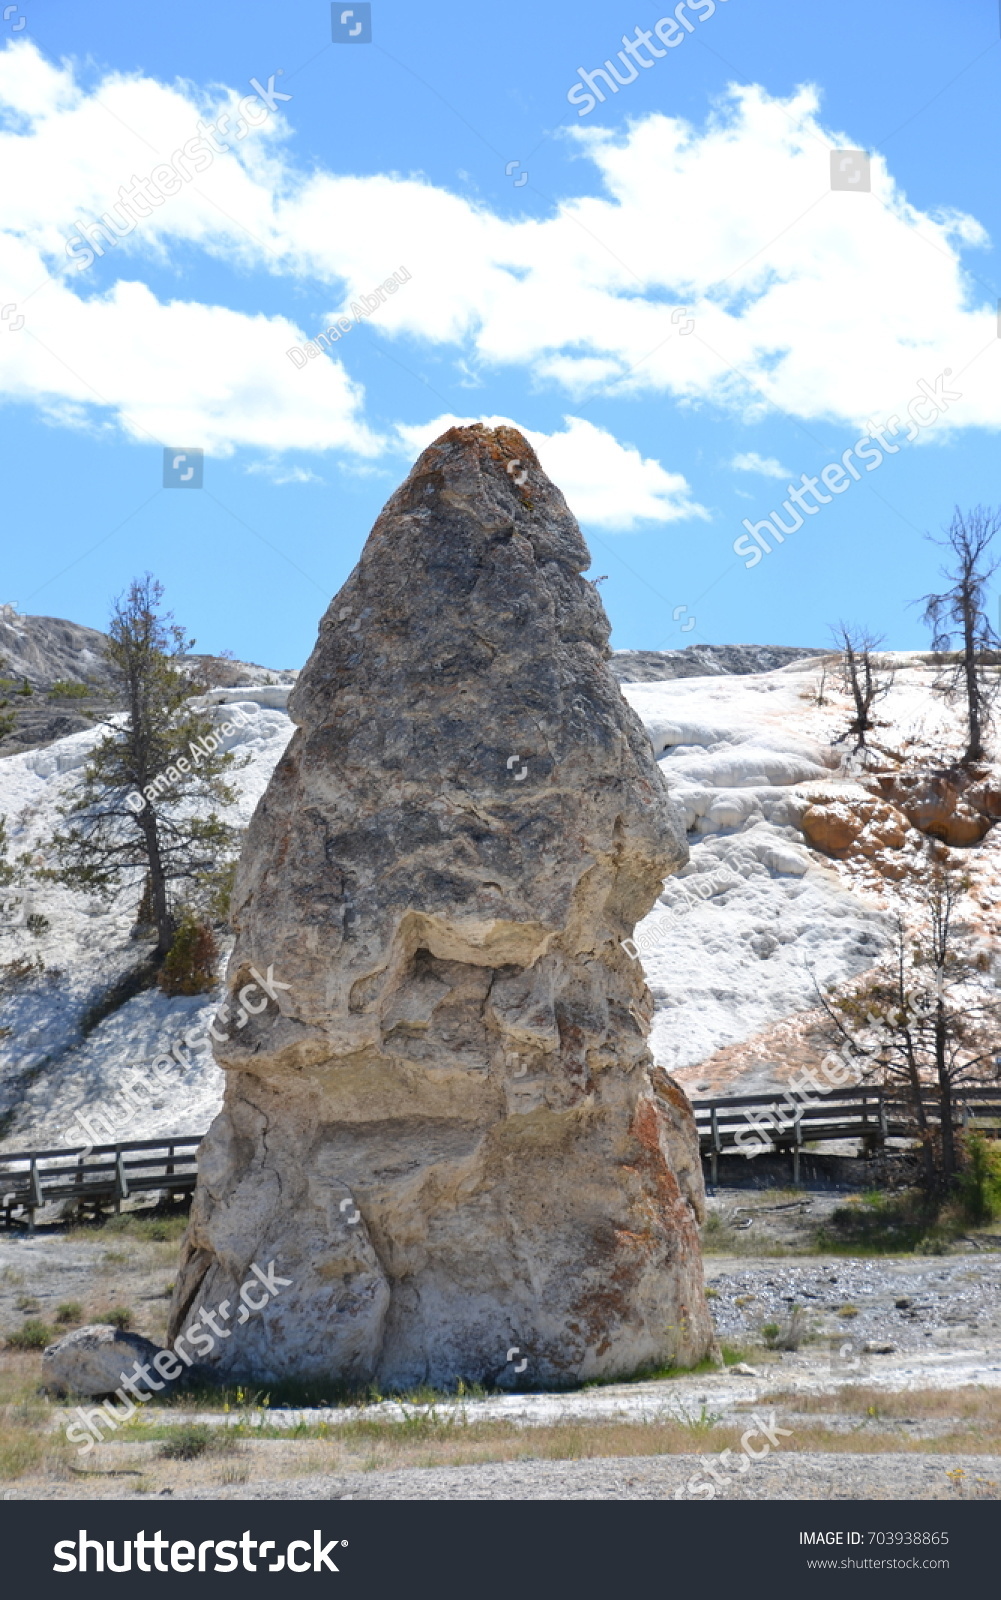 Liberty Cap a well known natural limestone and travertine monument in Mammoth Hot Springs Springs located in the Northern entrance of Yellowstone National Park, Wyoming #703938865